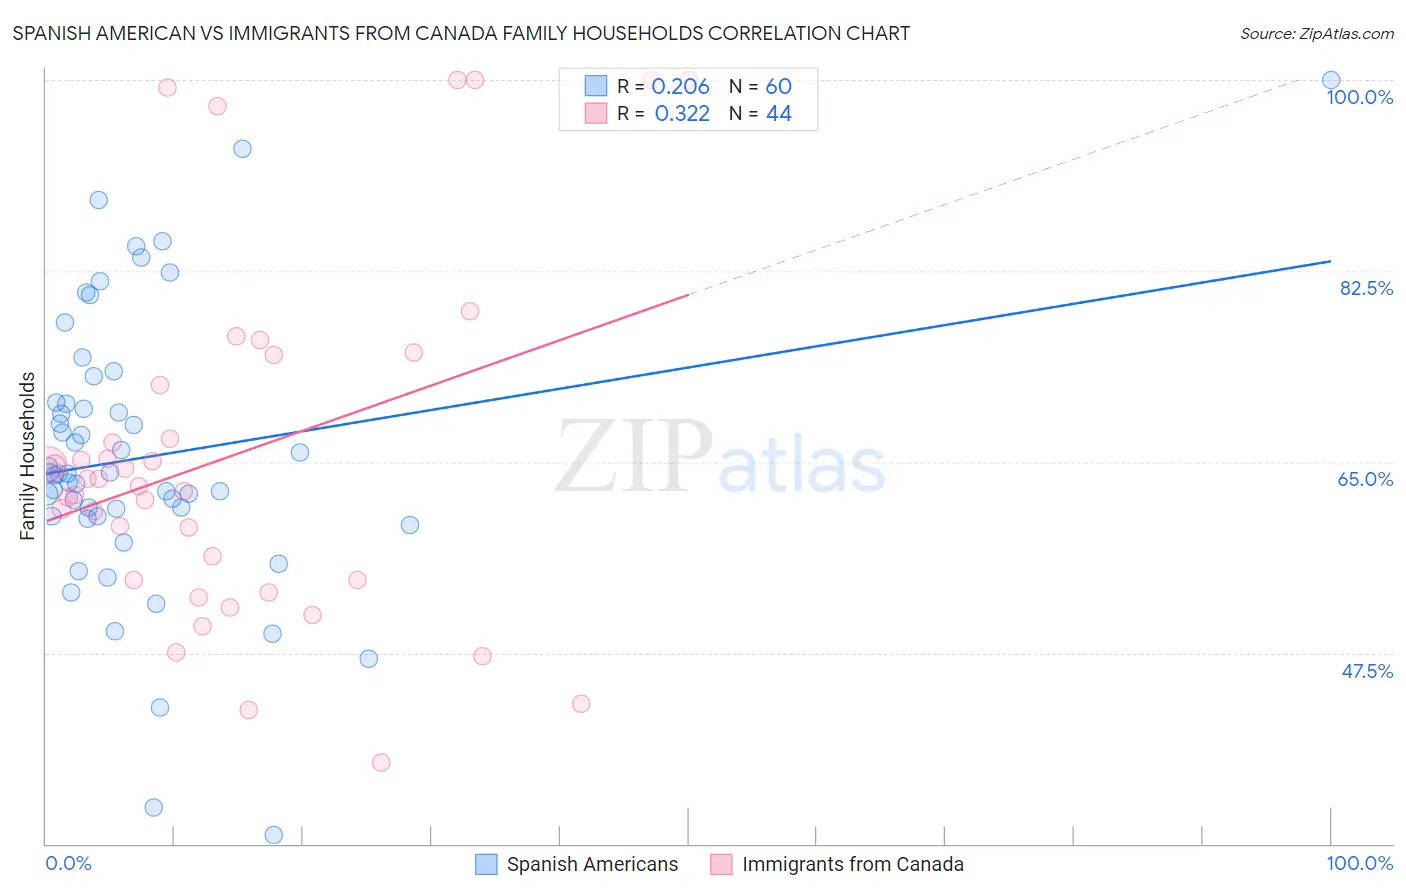 Spanish American vs Immigrants from Canada Family Households